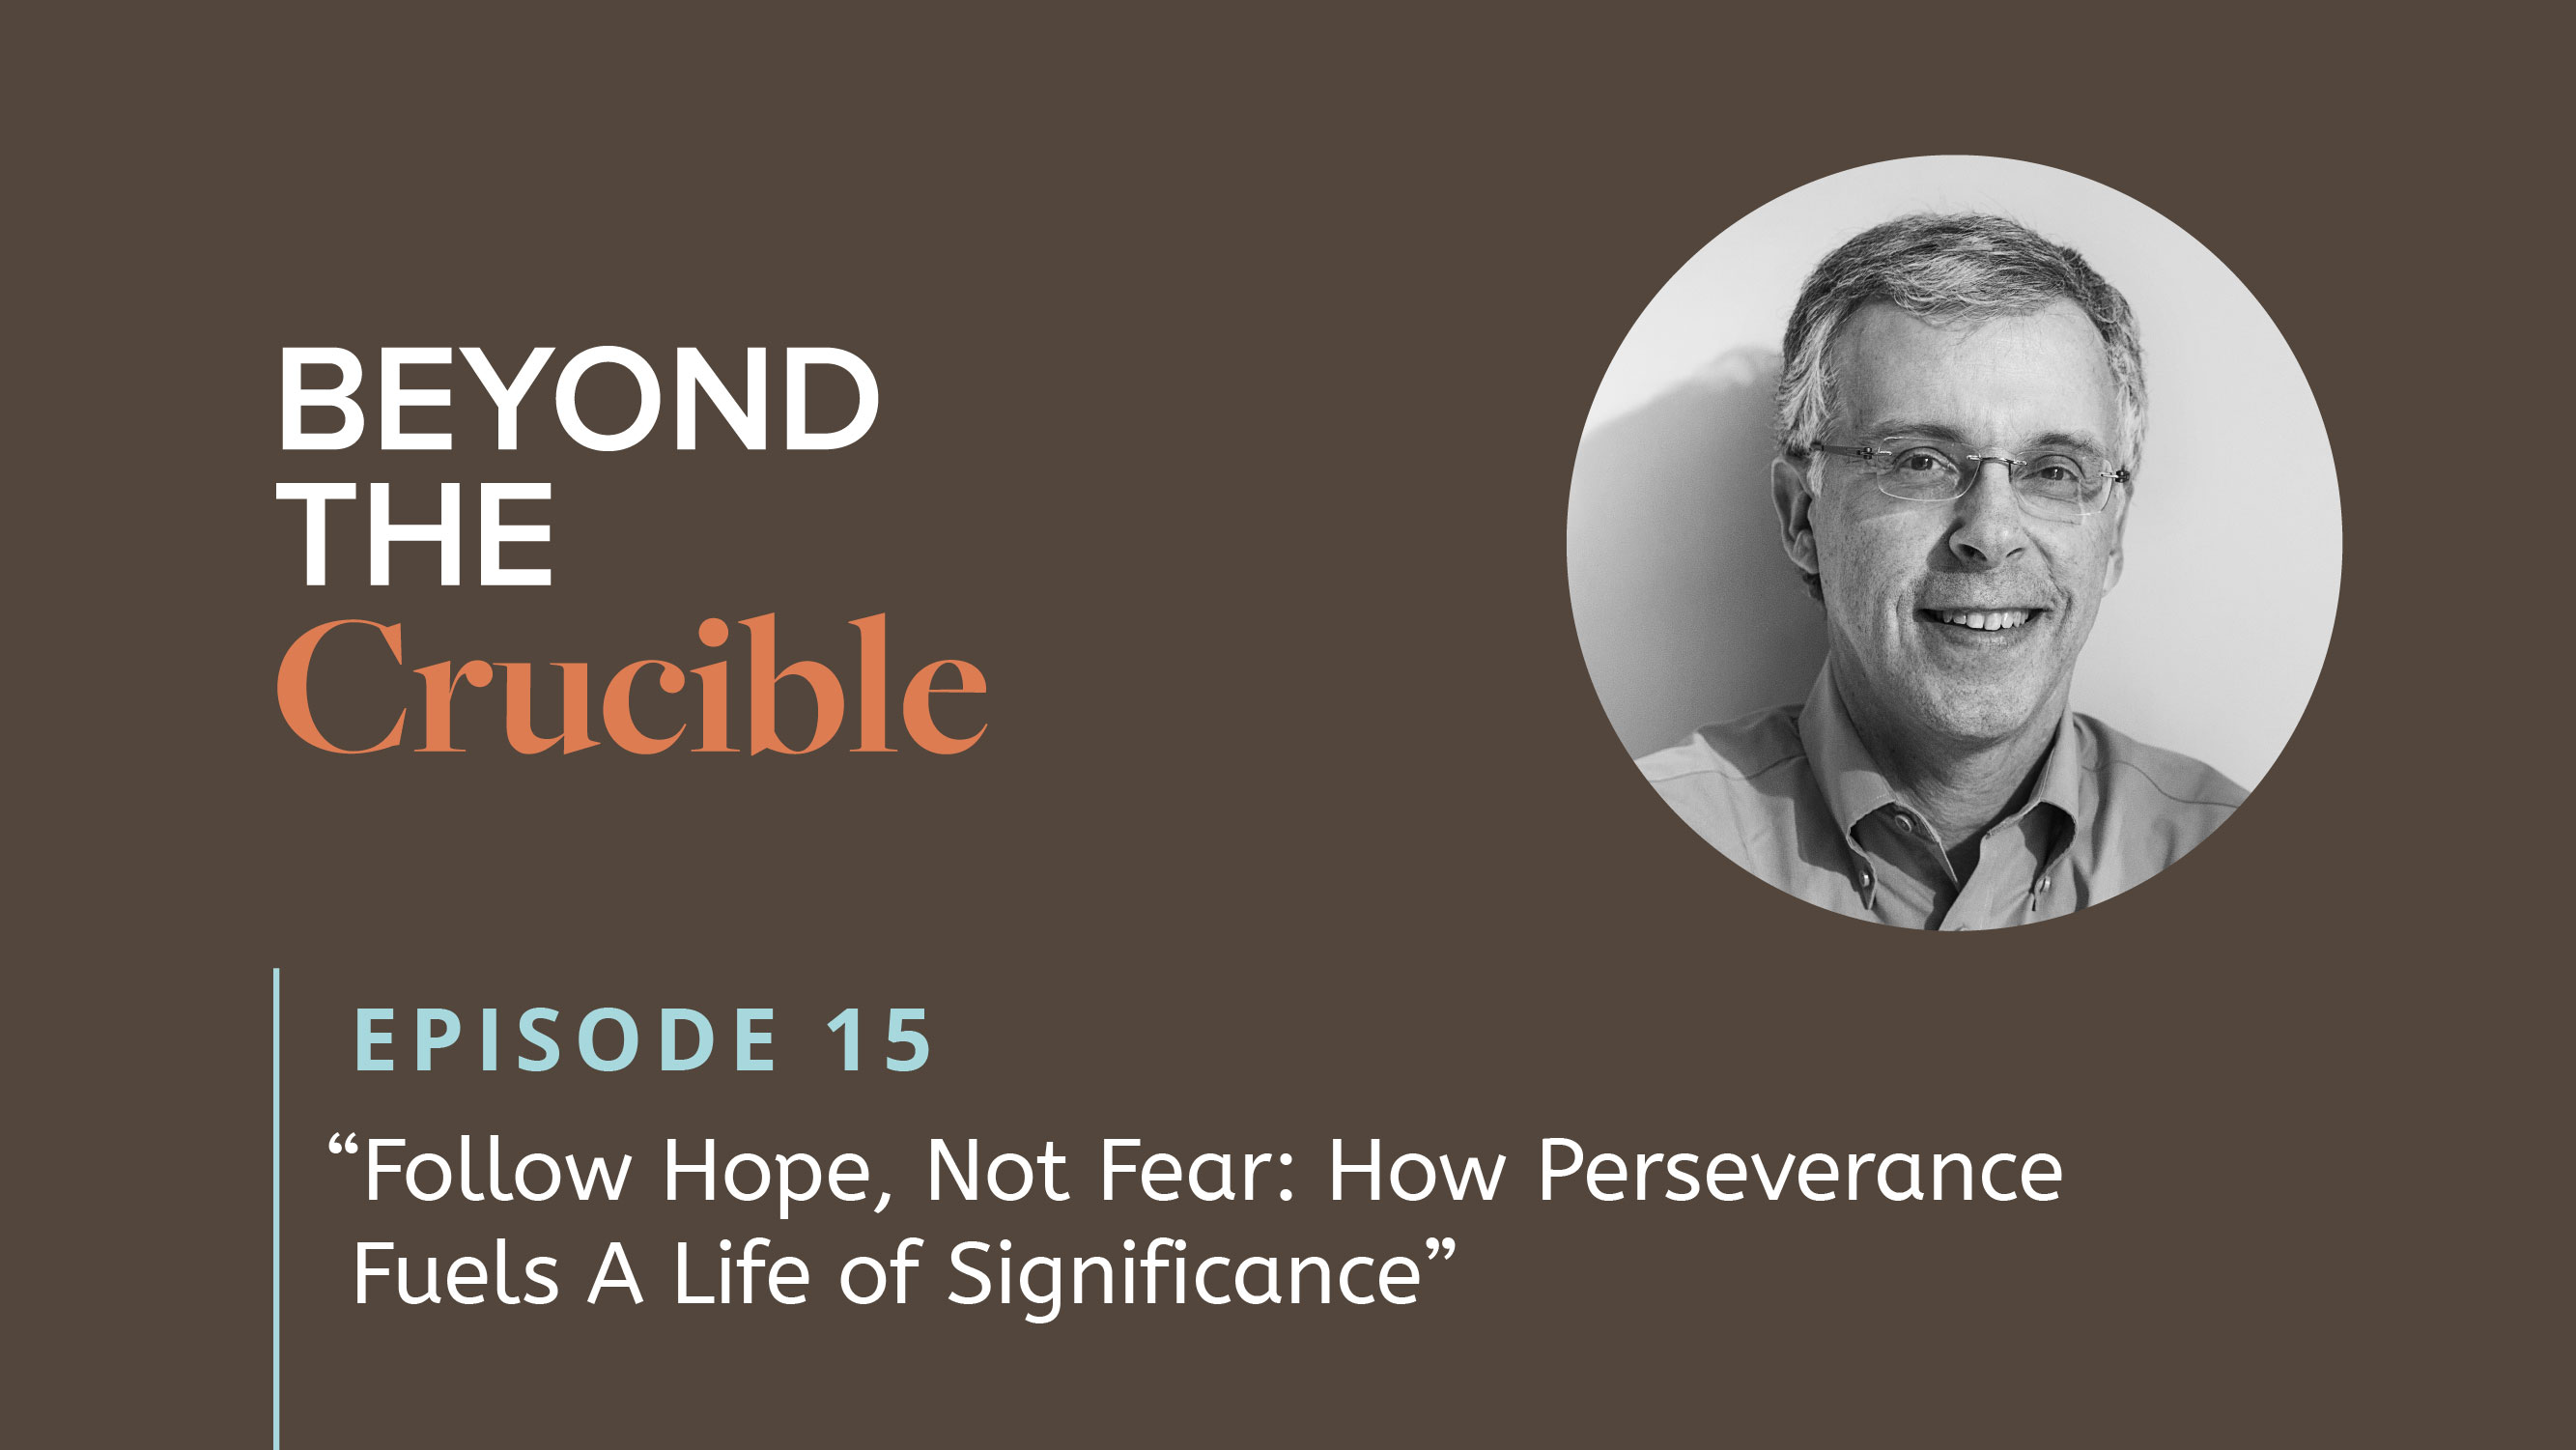 Follow Hope, Not Fear: How Perseverance Fuels A Life of Significance #15